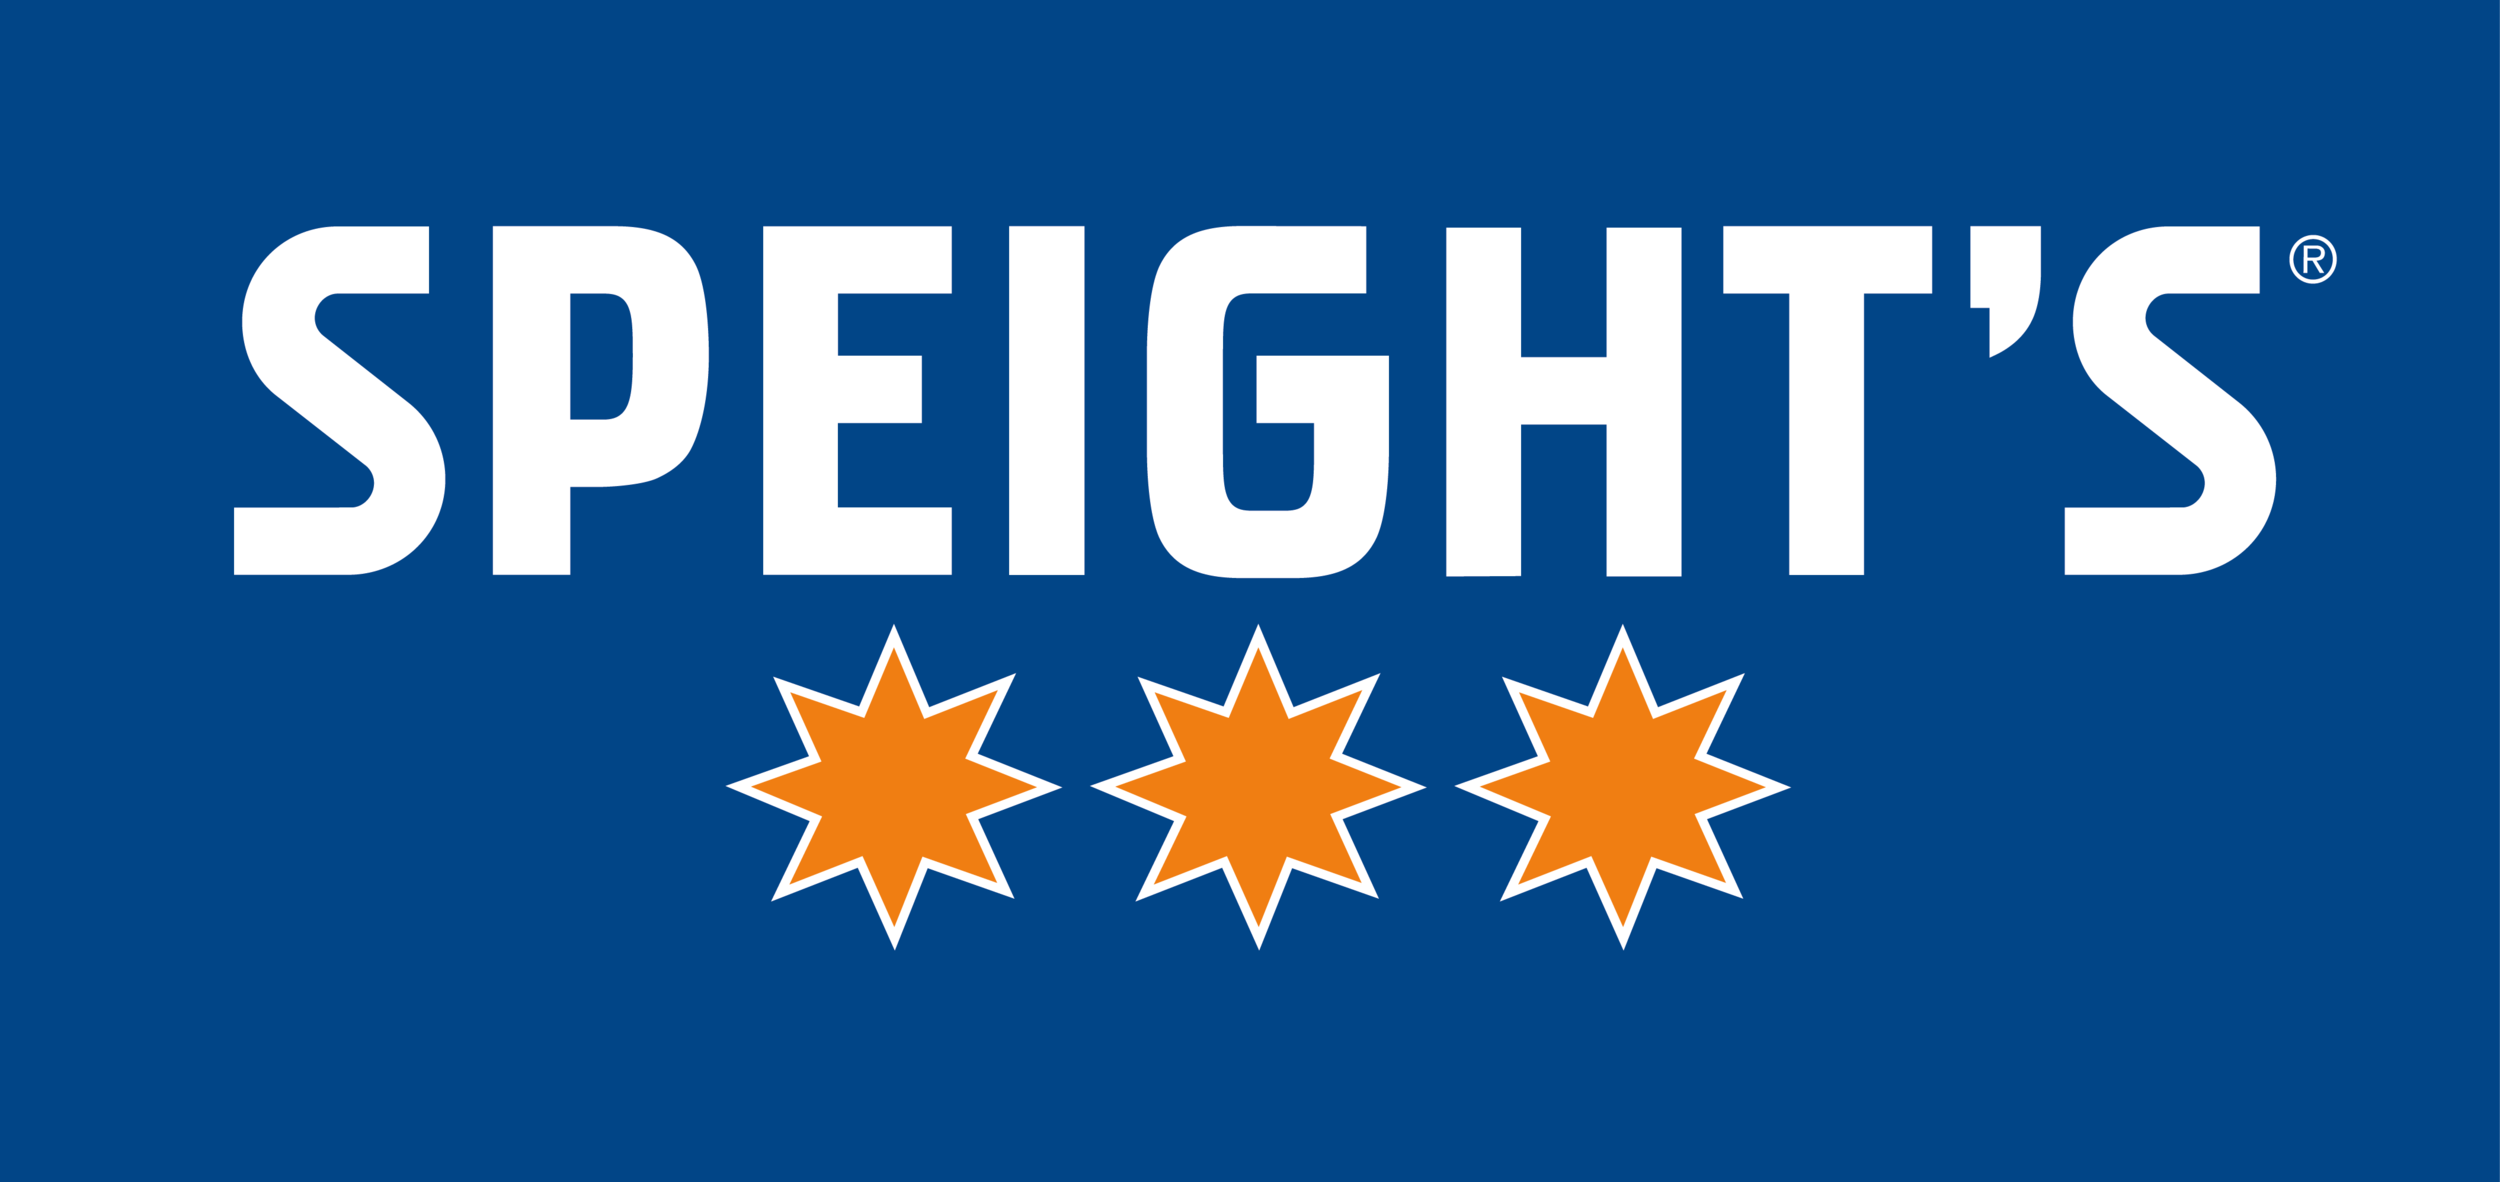 Speights Simplified Brand logo.png